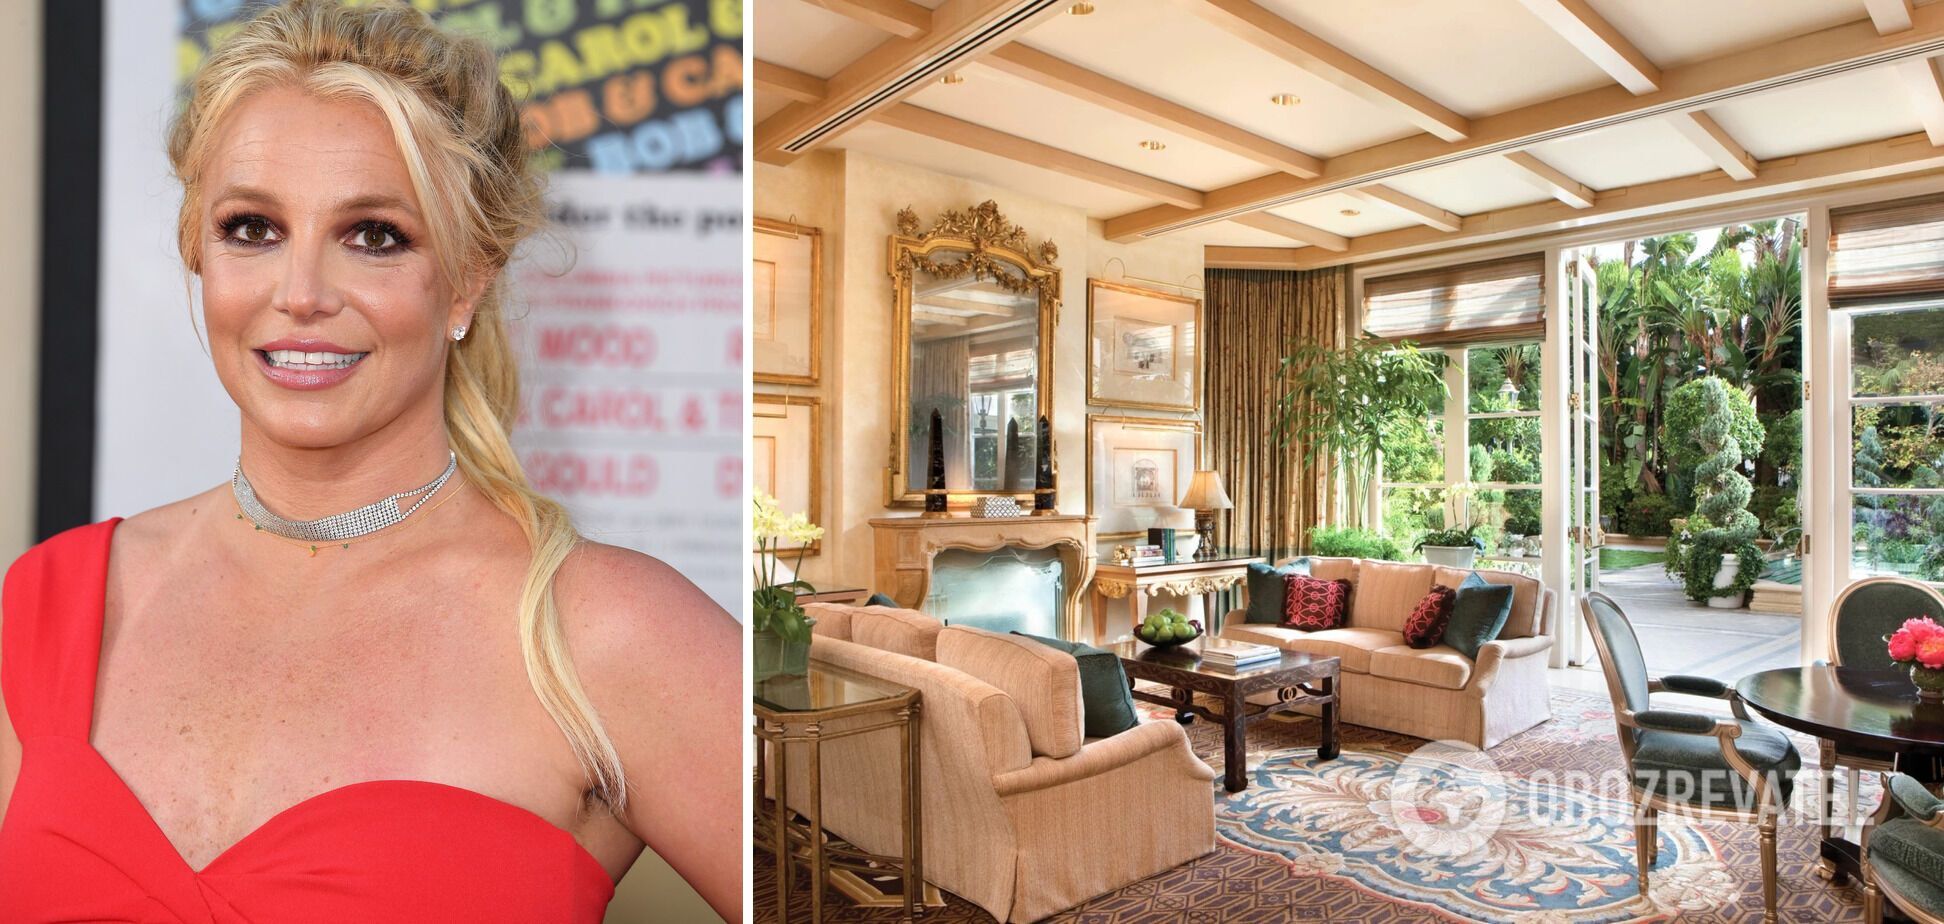 She walked naked by the pool: Britney Spears is blacklisted at a luxury hotel in Los Angeles